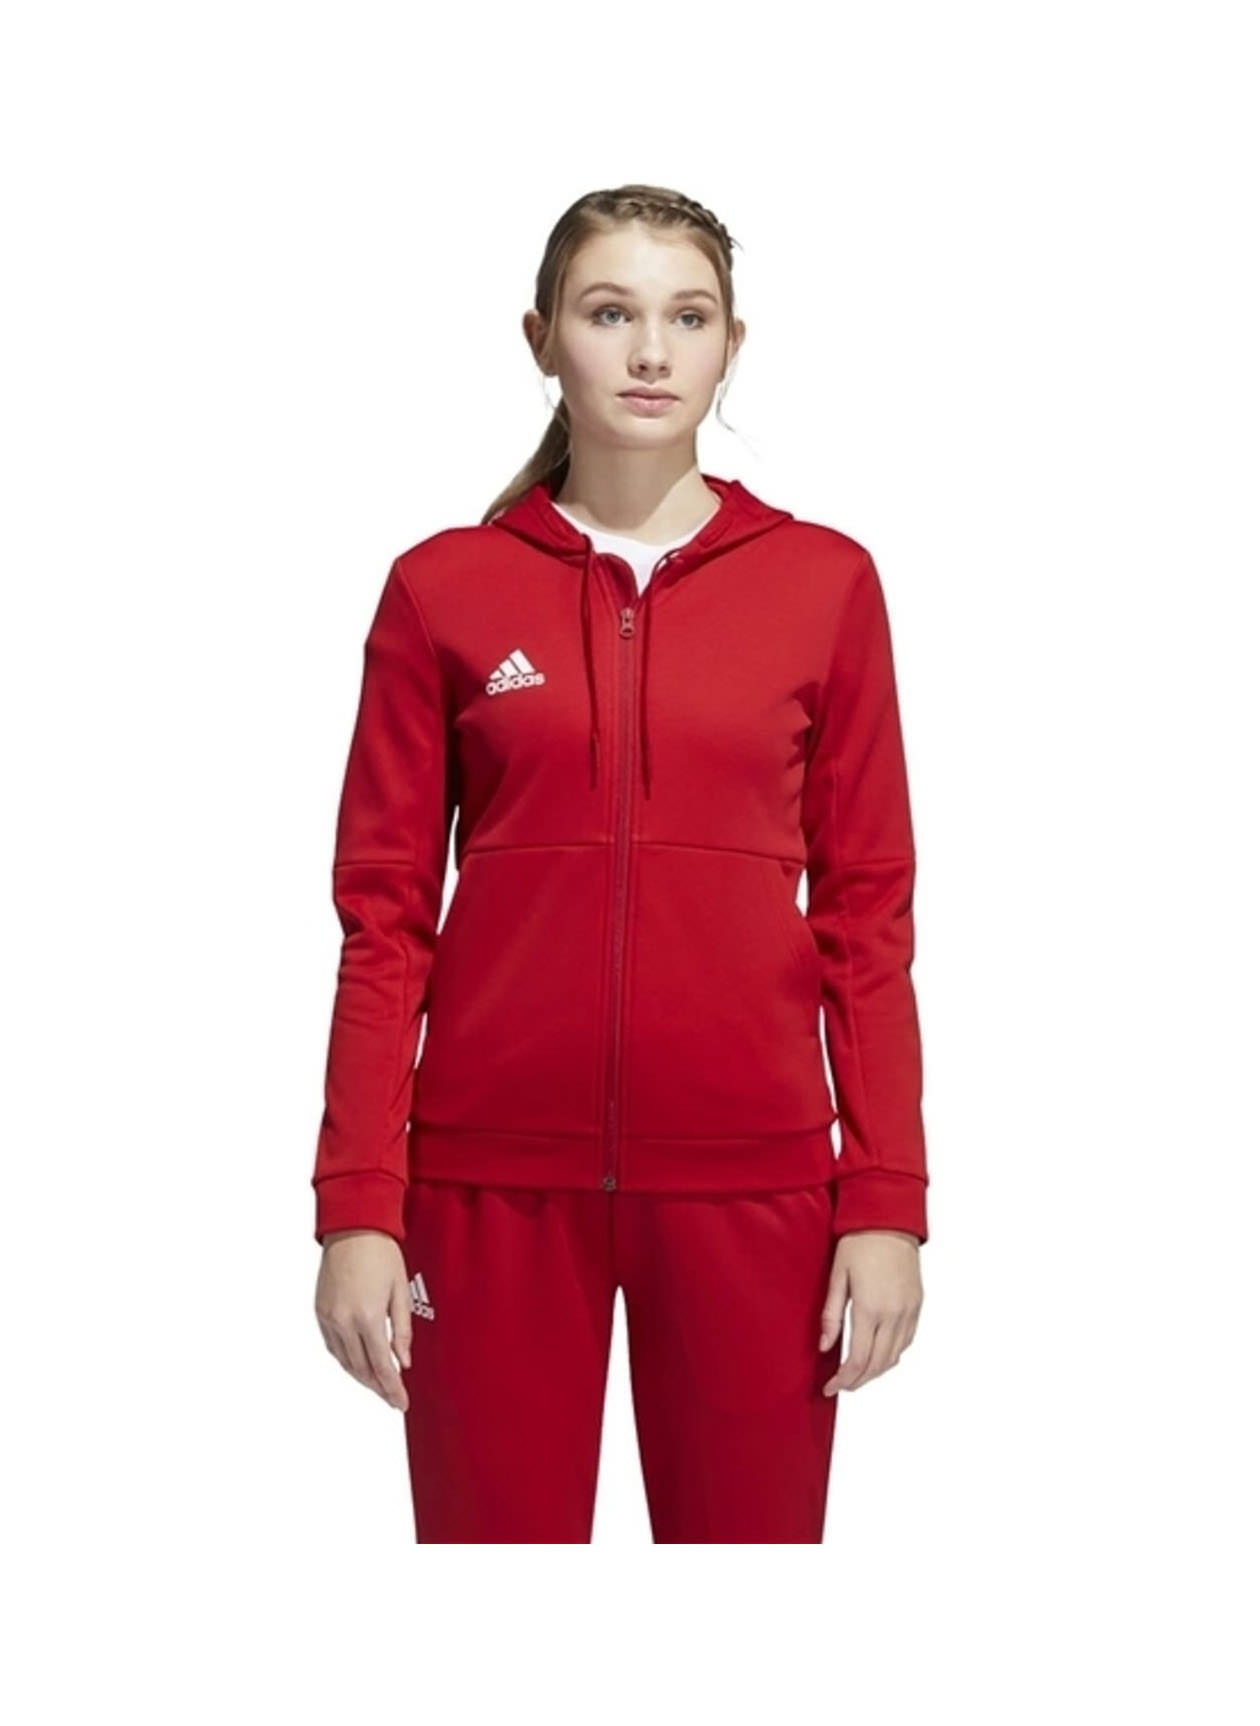 Adidas Women's Team Issue Pant